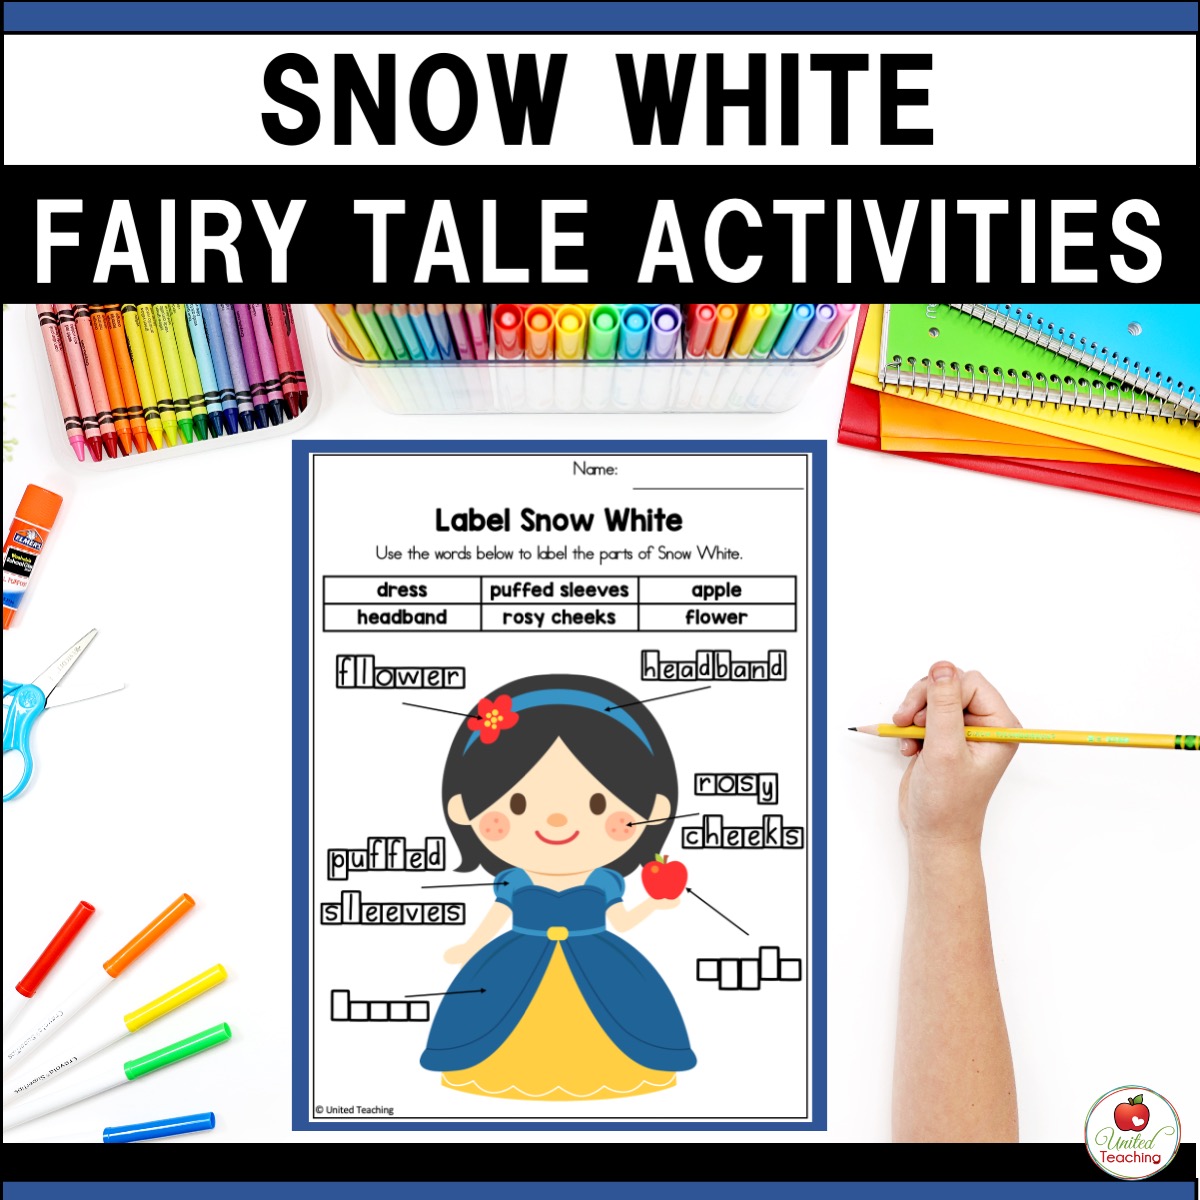 Snow White Fairy Tale Activities - United Teaching